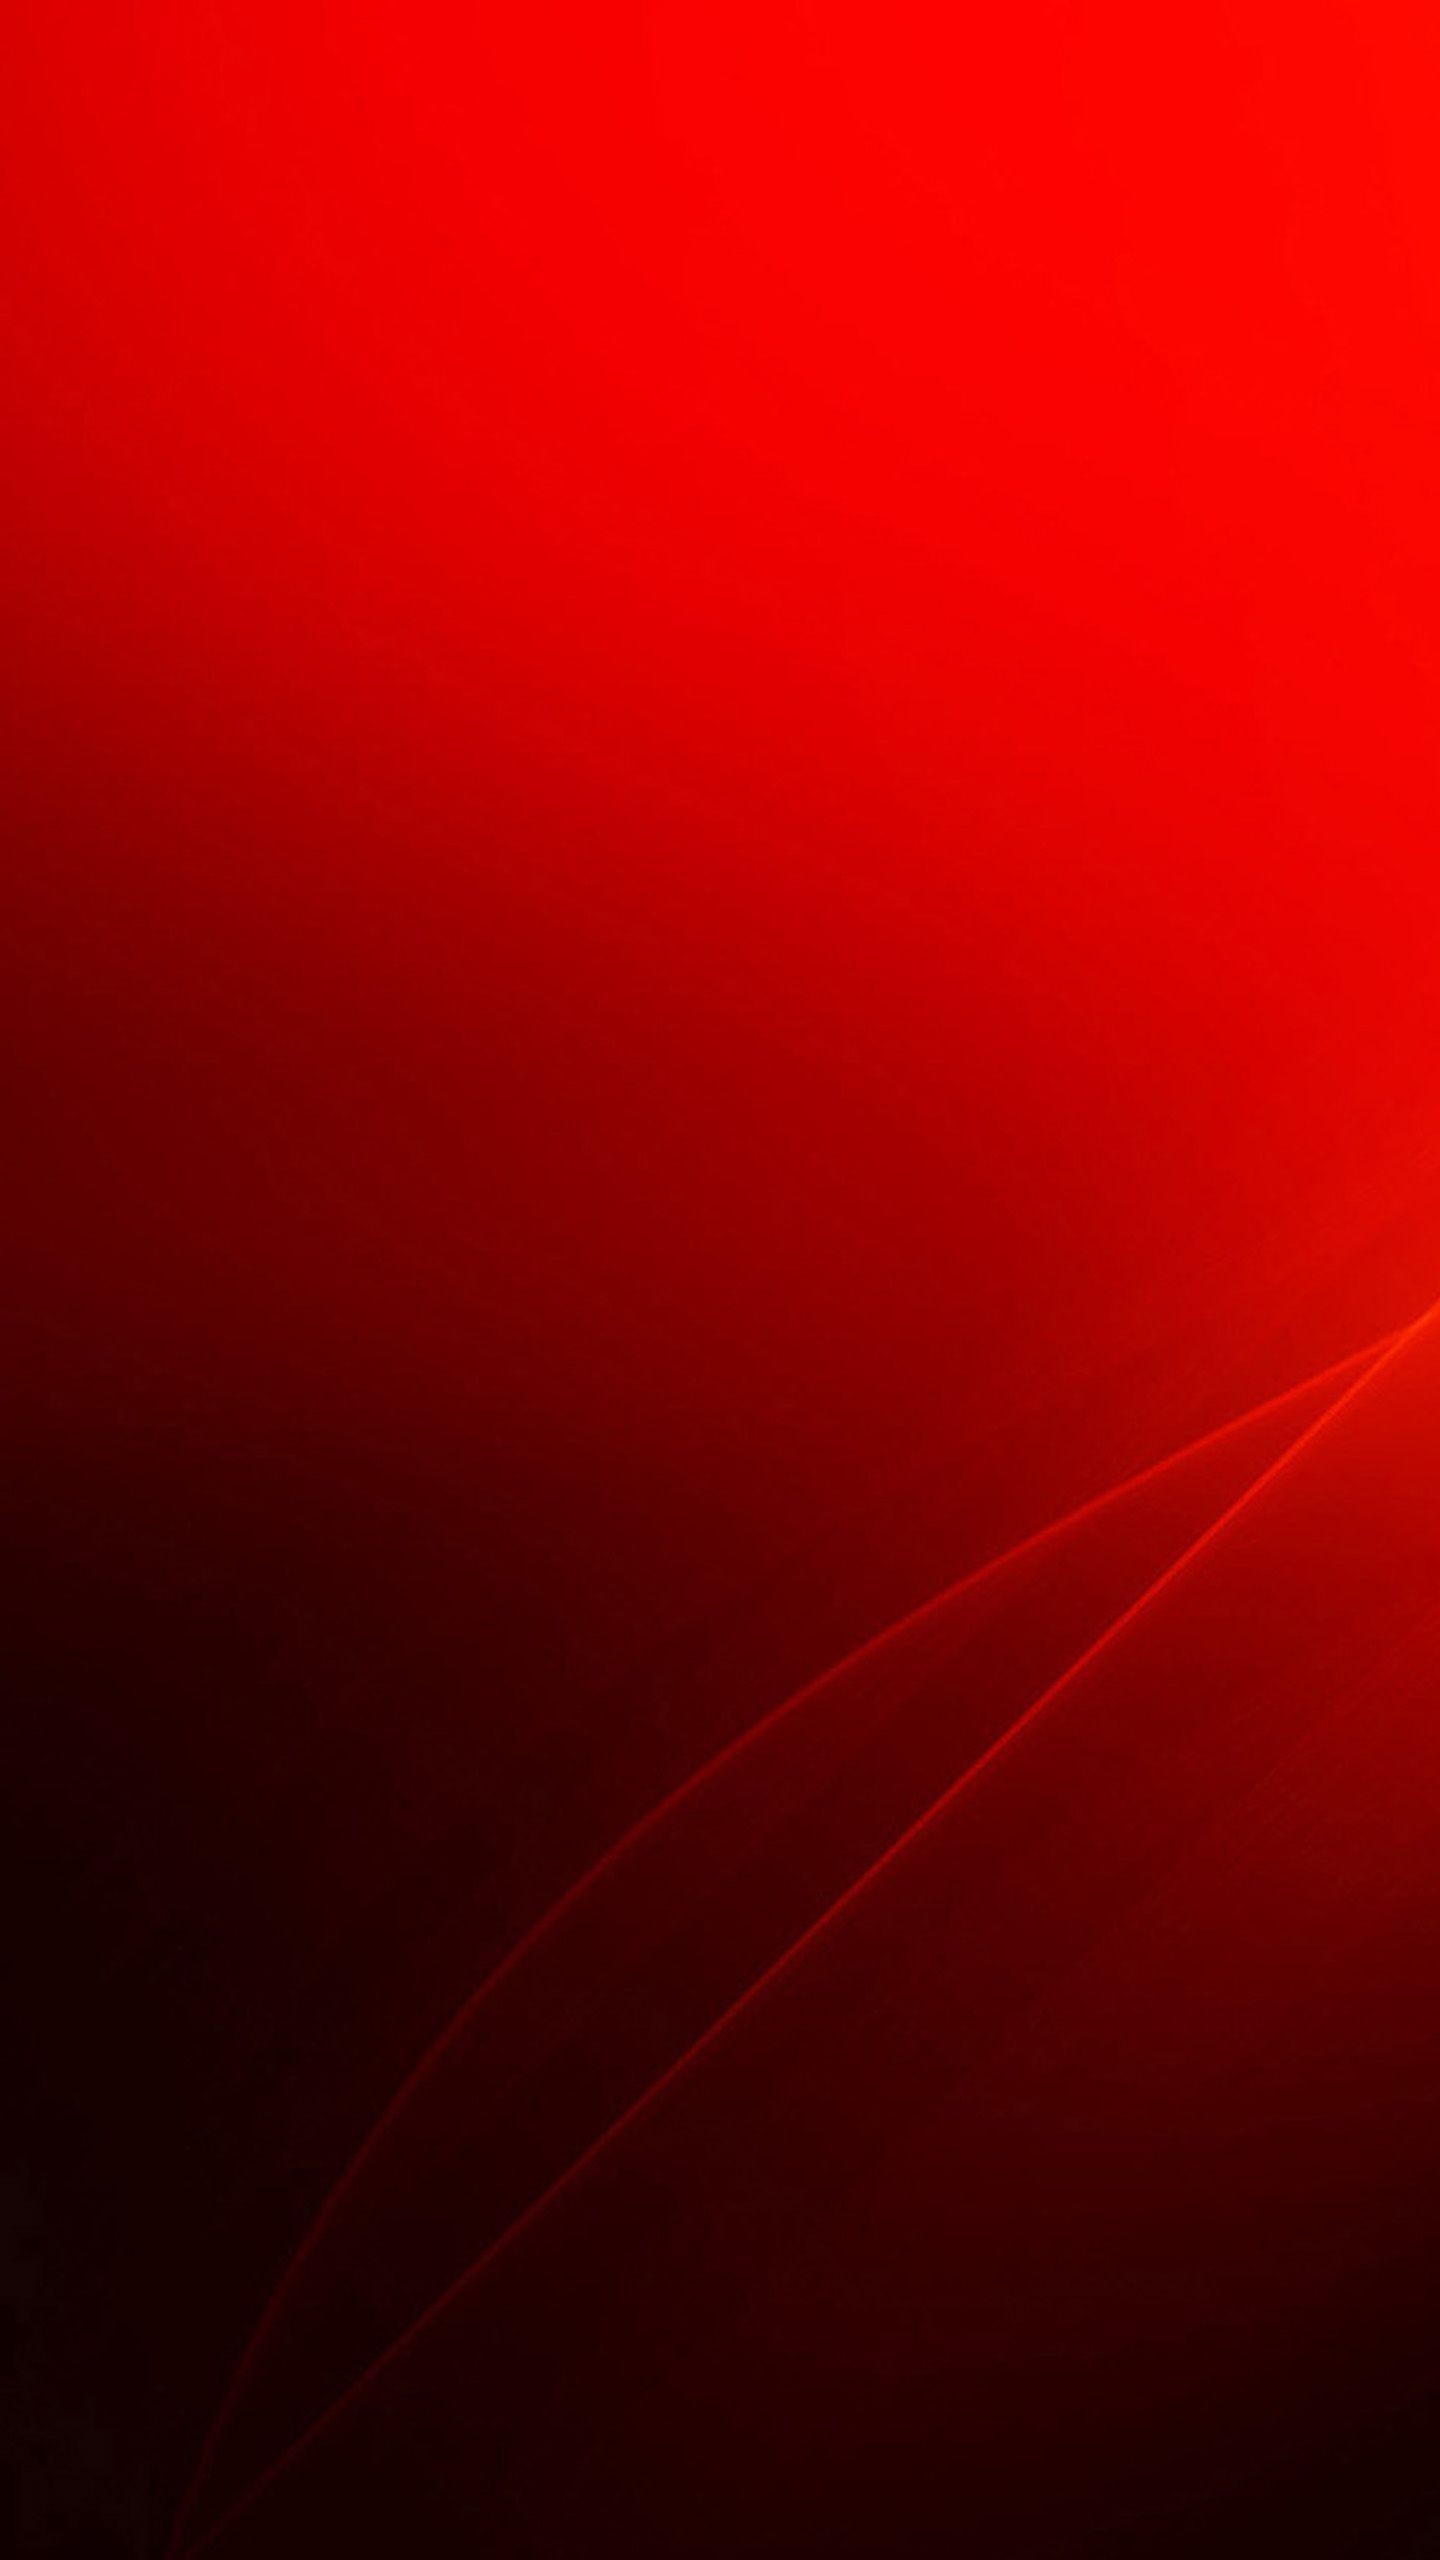 1440x2560 Red Abstract Mobile Phone Wallpaper http://wallpapers-and-backgrounds.net